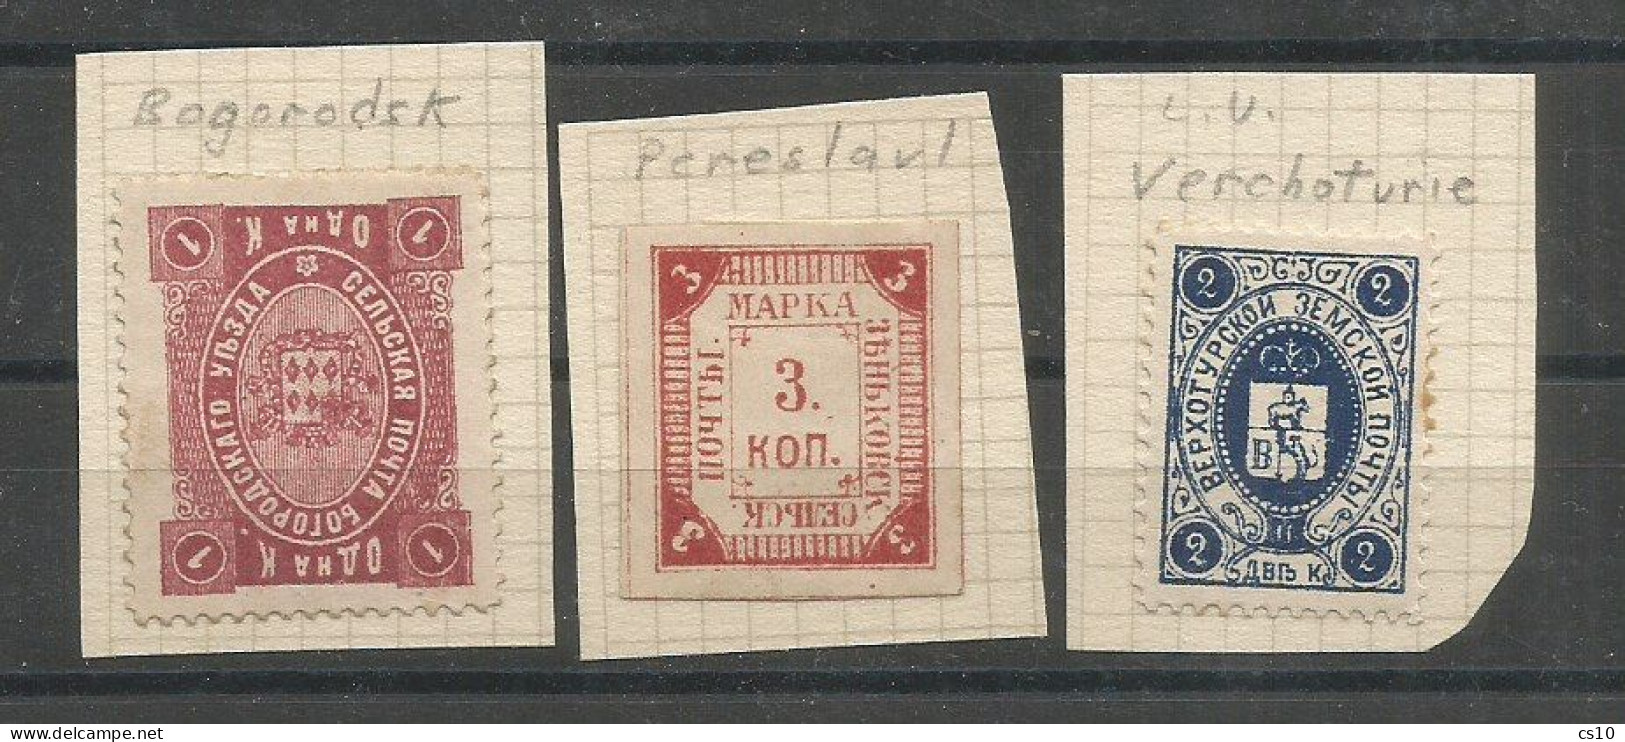 Old Russia Empire & Area #13 Scans Study Lot Of 490 Pcs Mint/Used Including Suomi Finland Levant, Some Piece, Imperf - Gebruikt